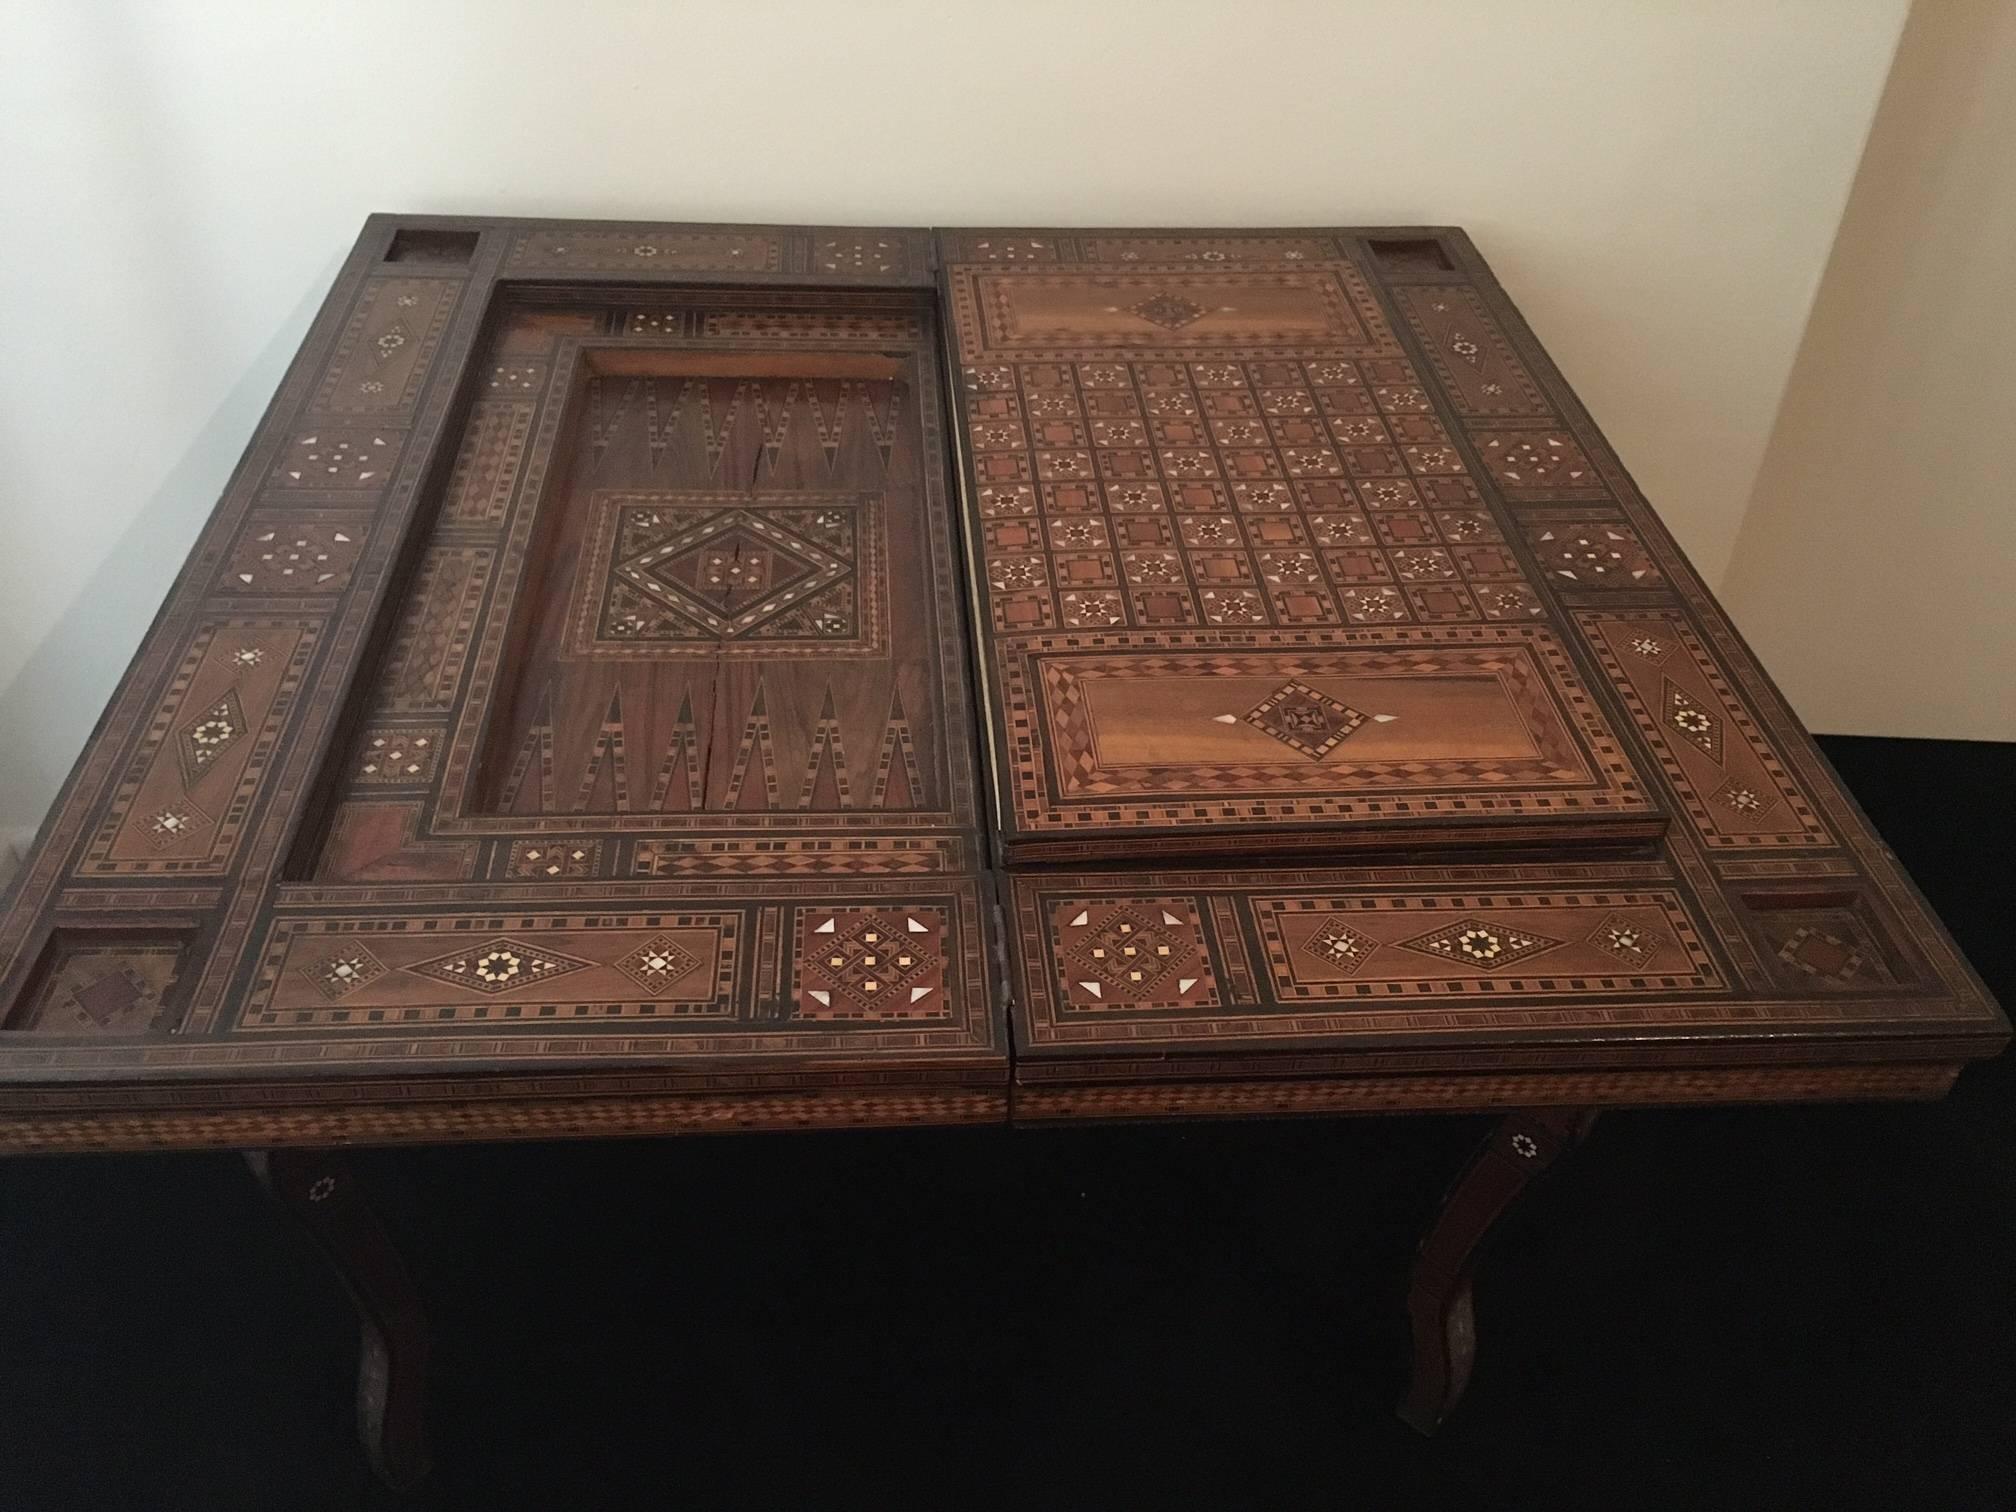 19th century game table inlaid with bone, ebony, mother of pearl geometrical patterns.
Wonderful example of Syrian furniture and is a very pretty decorative piece.